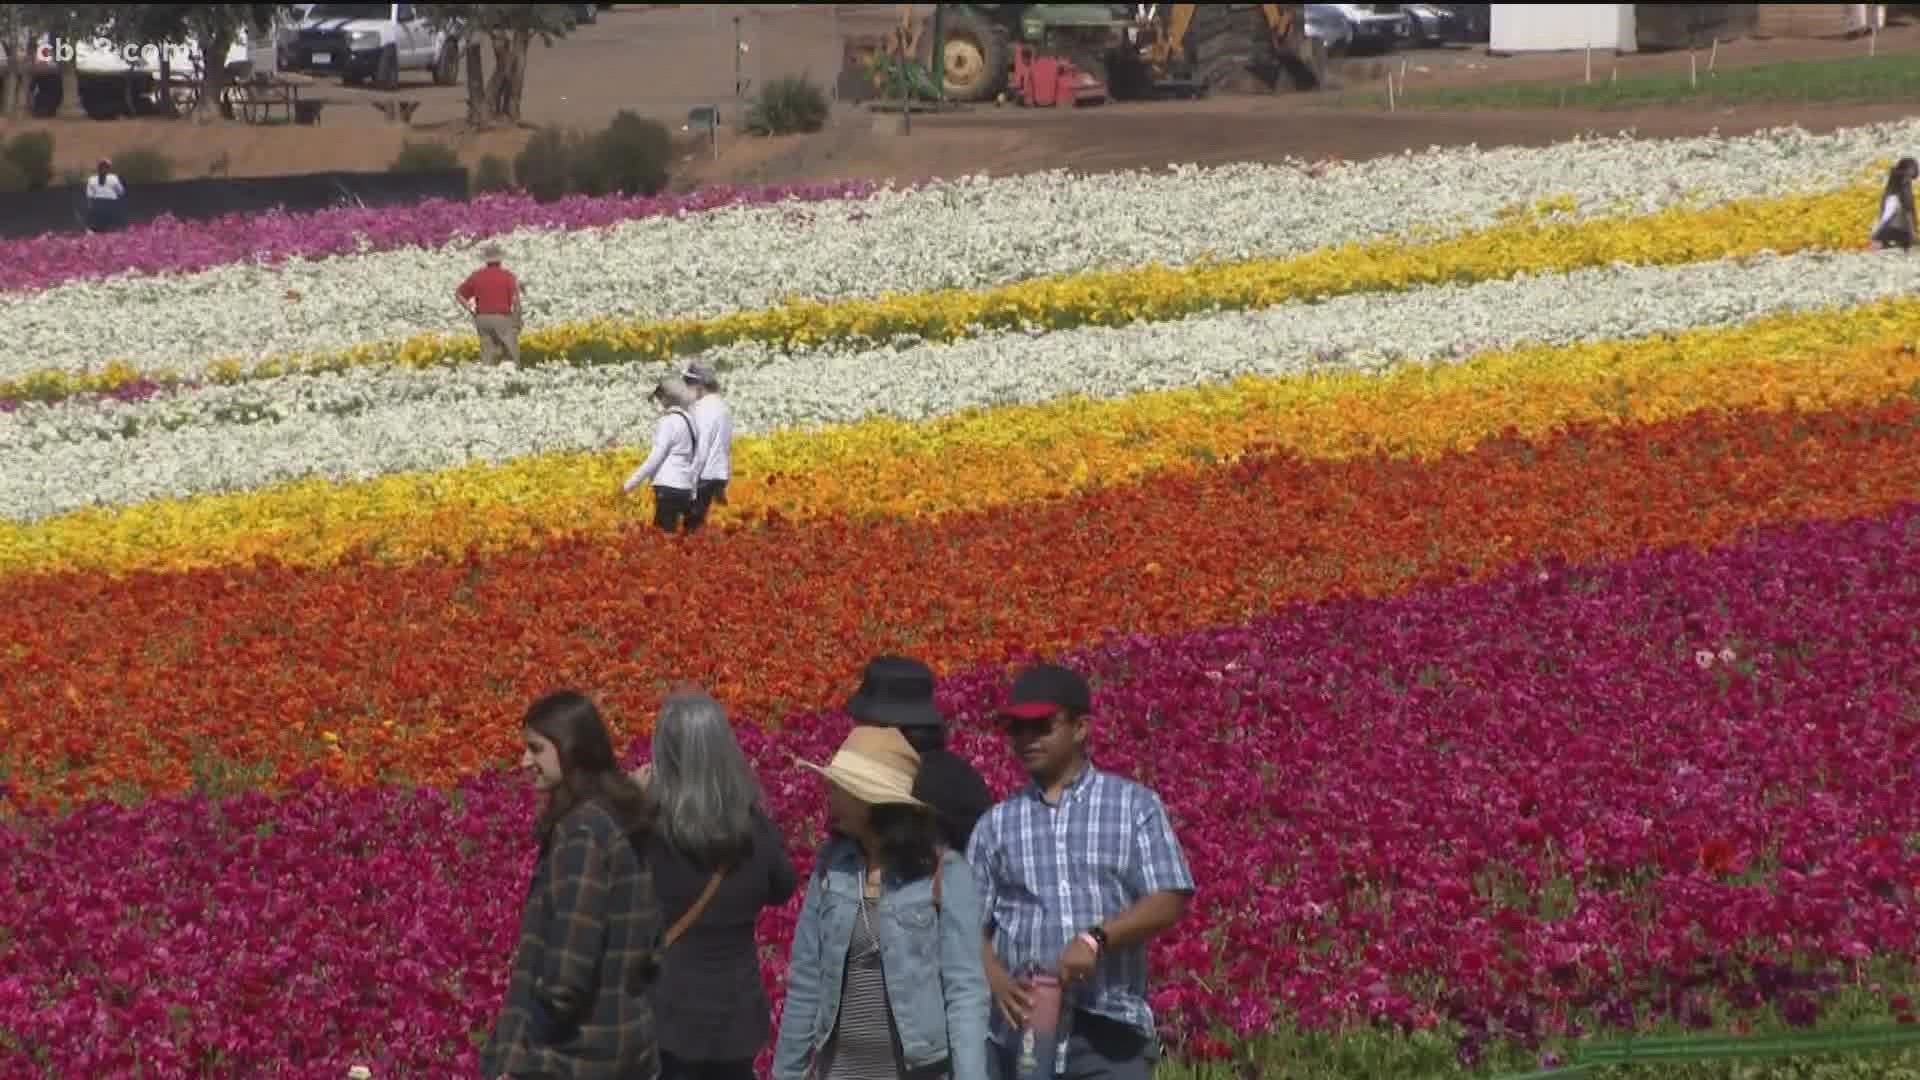 250,000 visitors enjoy 10 weeks of wonderful flower displays between March 1 and Mother's Day every year.